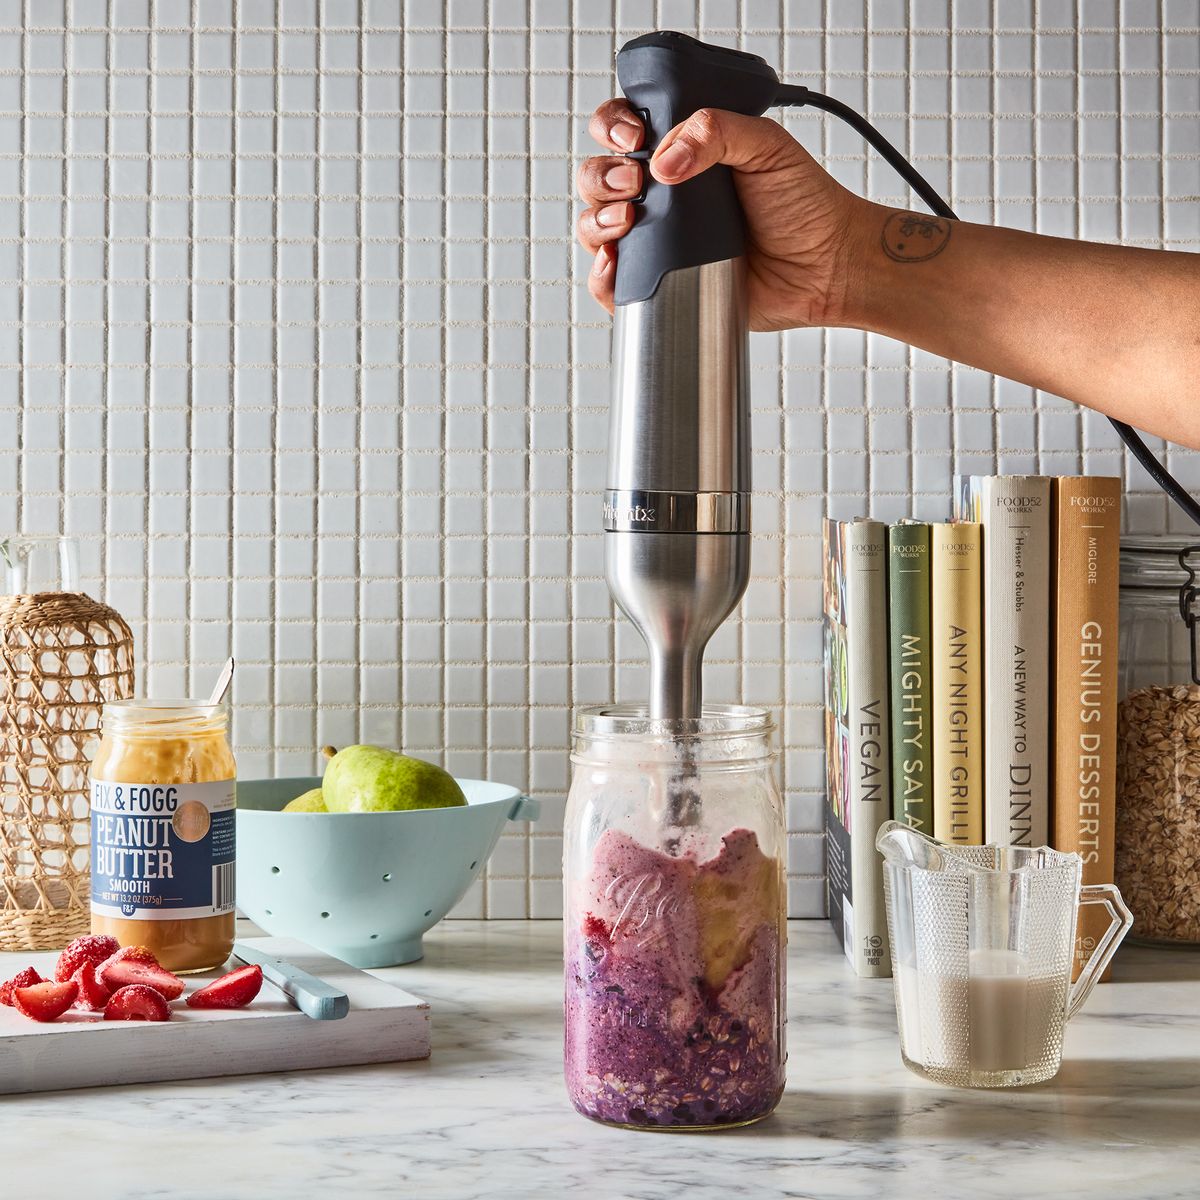 10 Great Kitchen Gadget Gifts to Get Your Mom for Mother's Day 2017